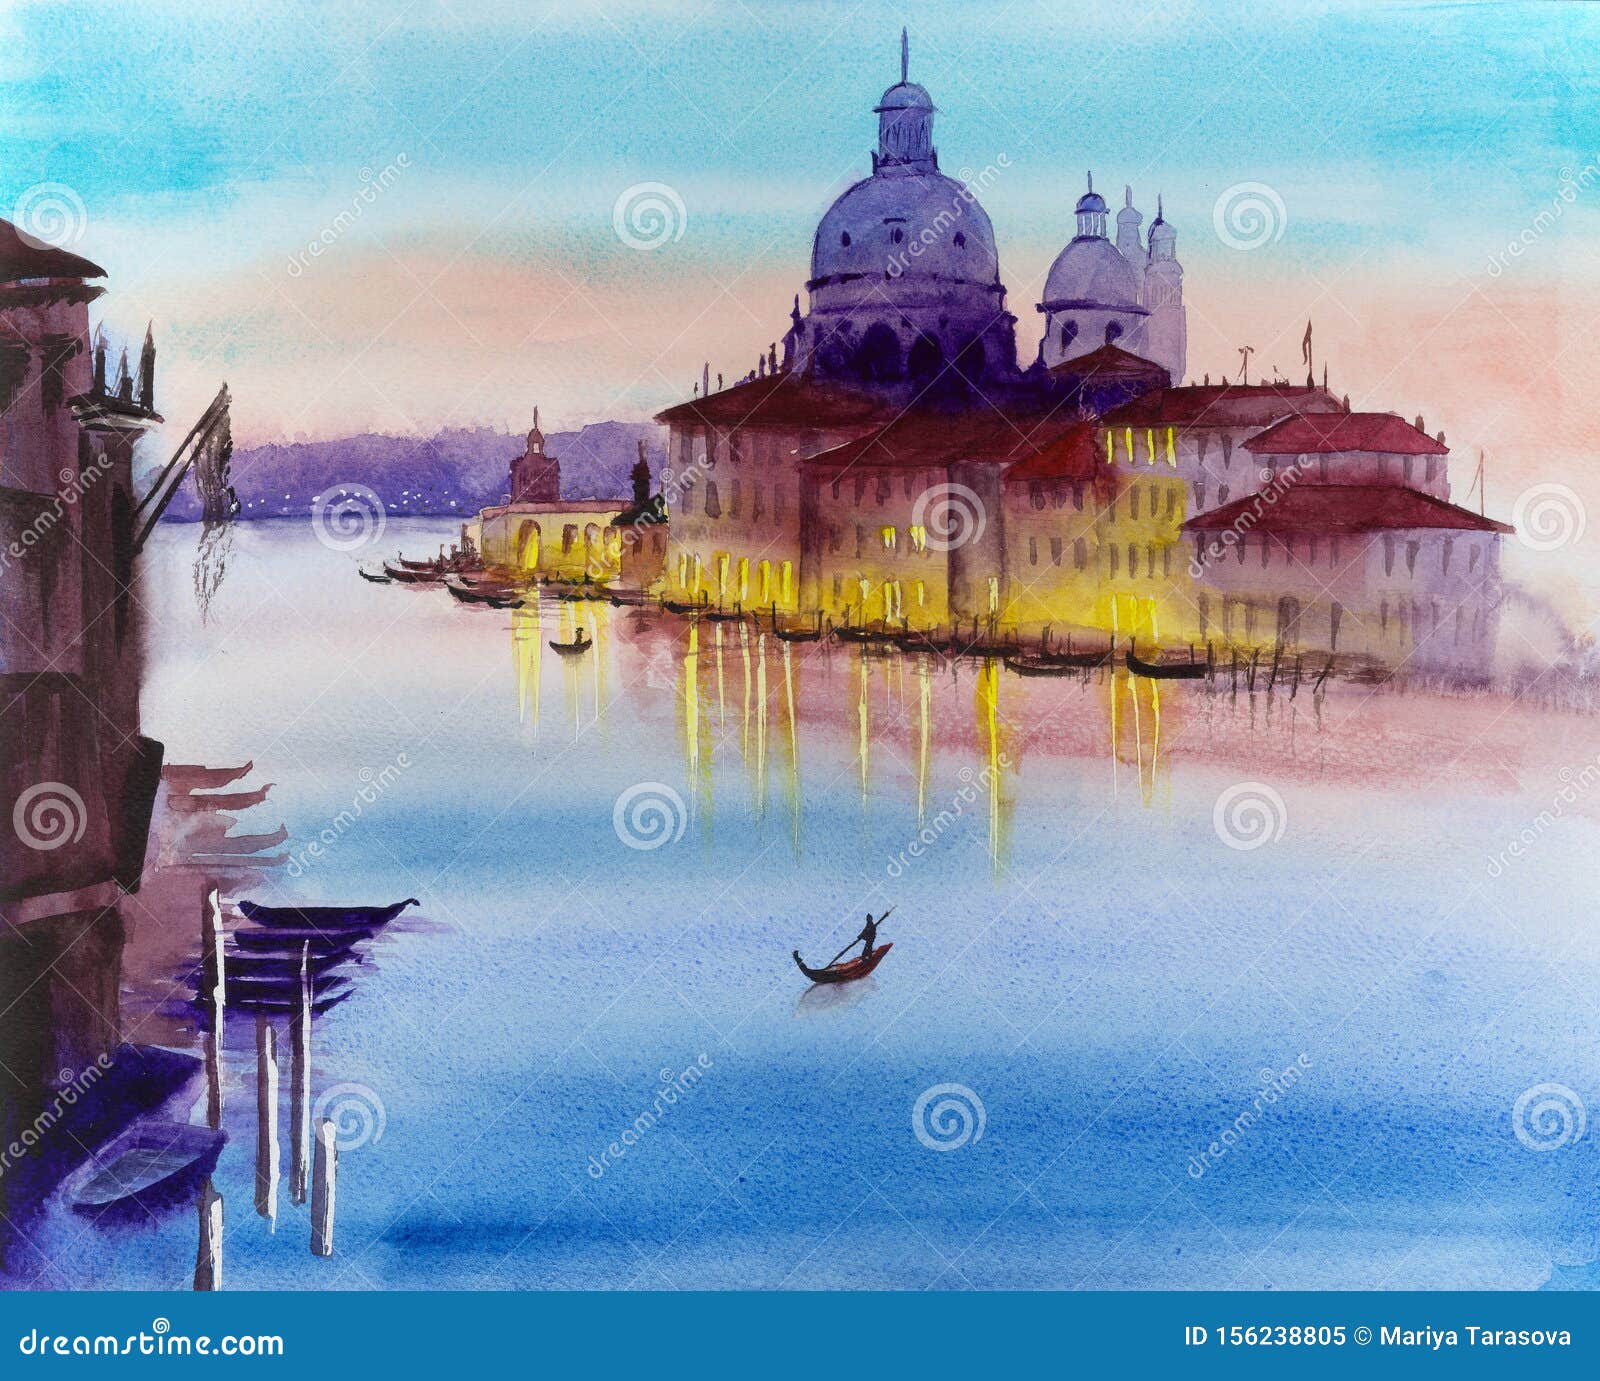 watercolor venice canal with gondolas and palaces